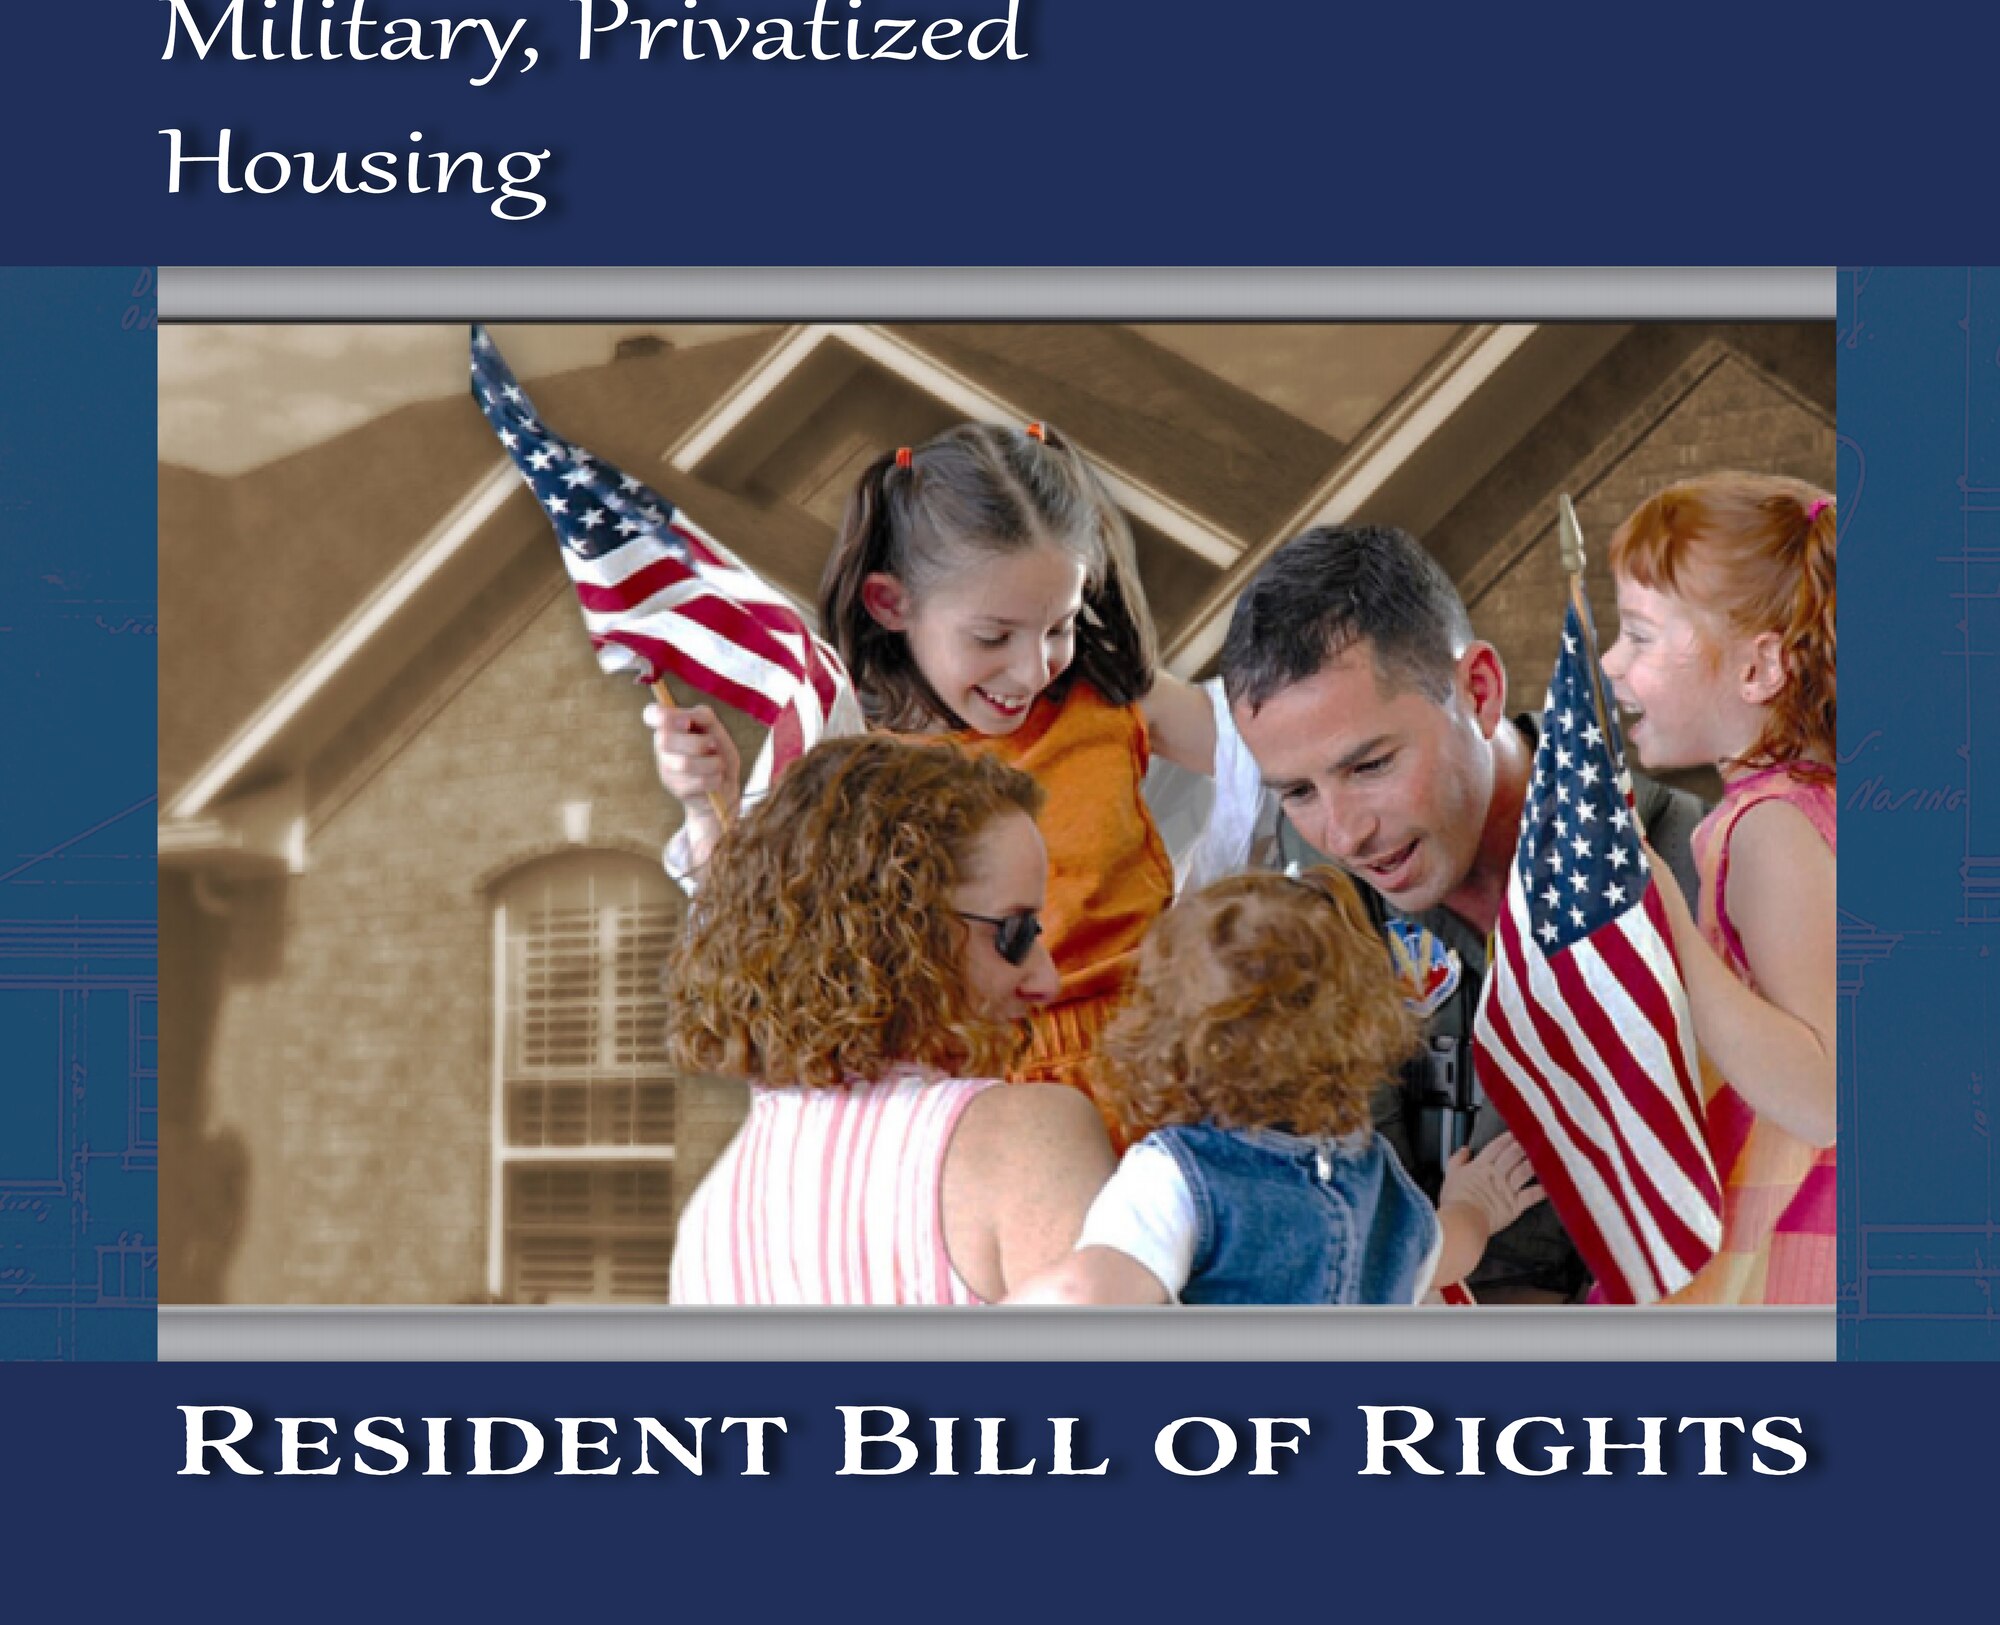 The Department of Defense is asking current residents of military privatized housing to provide feedback on a draft version of a Resident Bill of Rights.